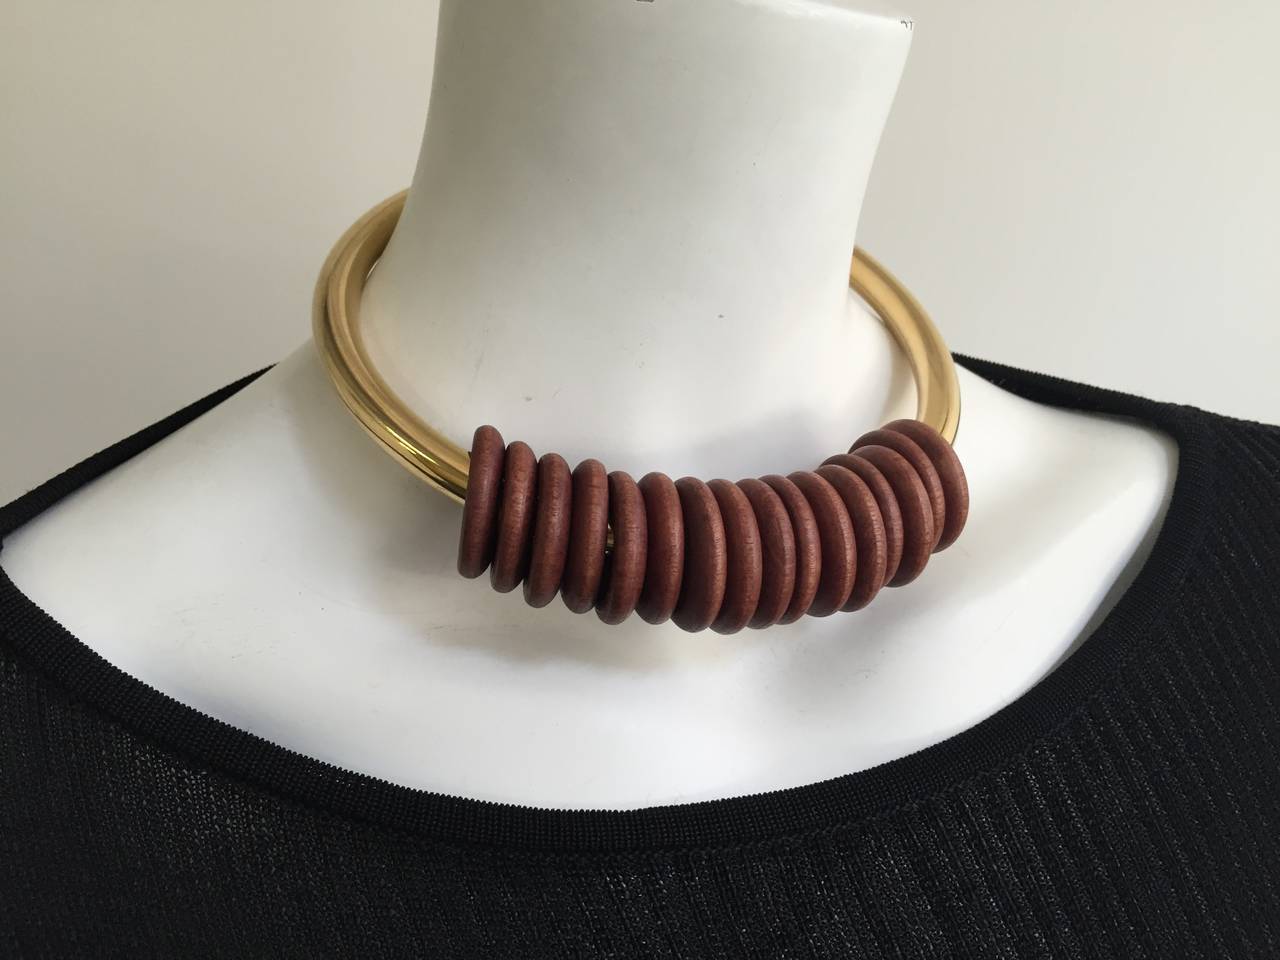 Alexis Kirk 1980s 'Wood Collection' brass & wood flex chocker necklace. This statement piece, along with the Alexis Kirk belt & earrings listed here on 1stdibs, are all from the 'Wood Collection' Alexis Kirk designed in the 80s. This necklace, as